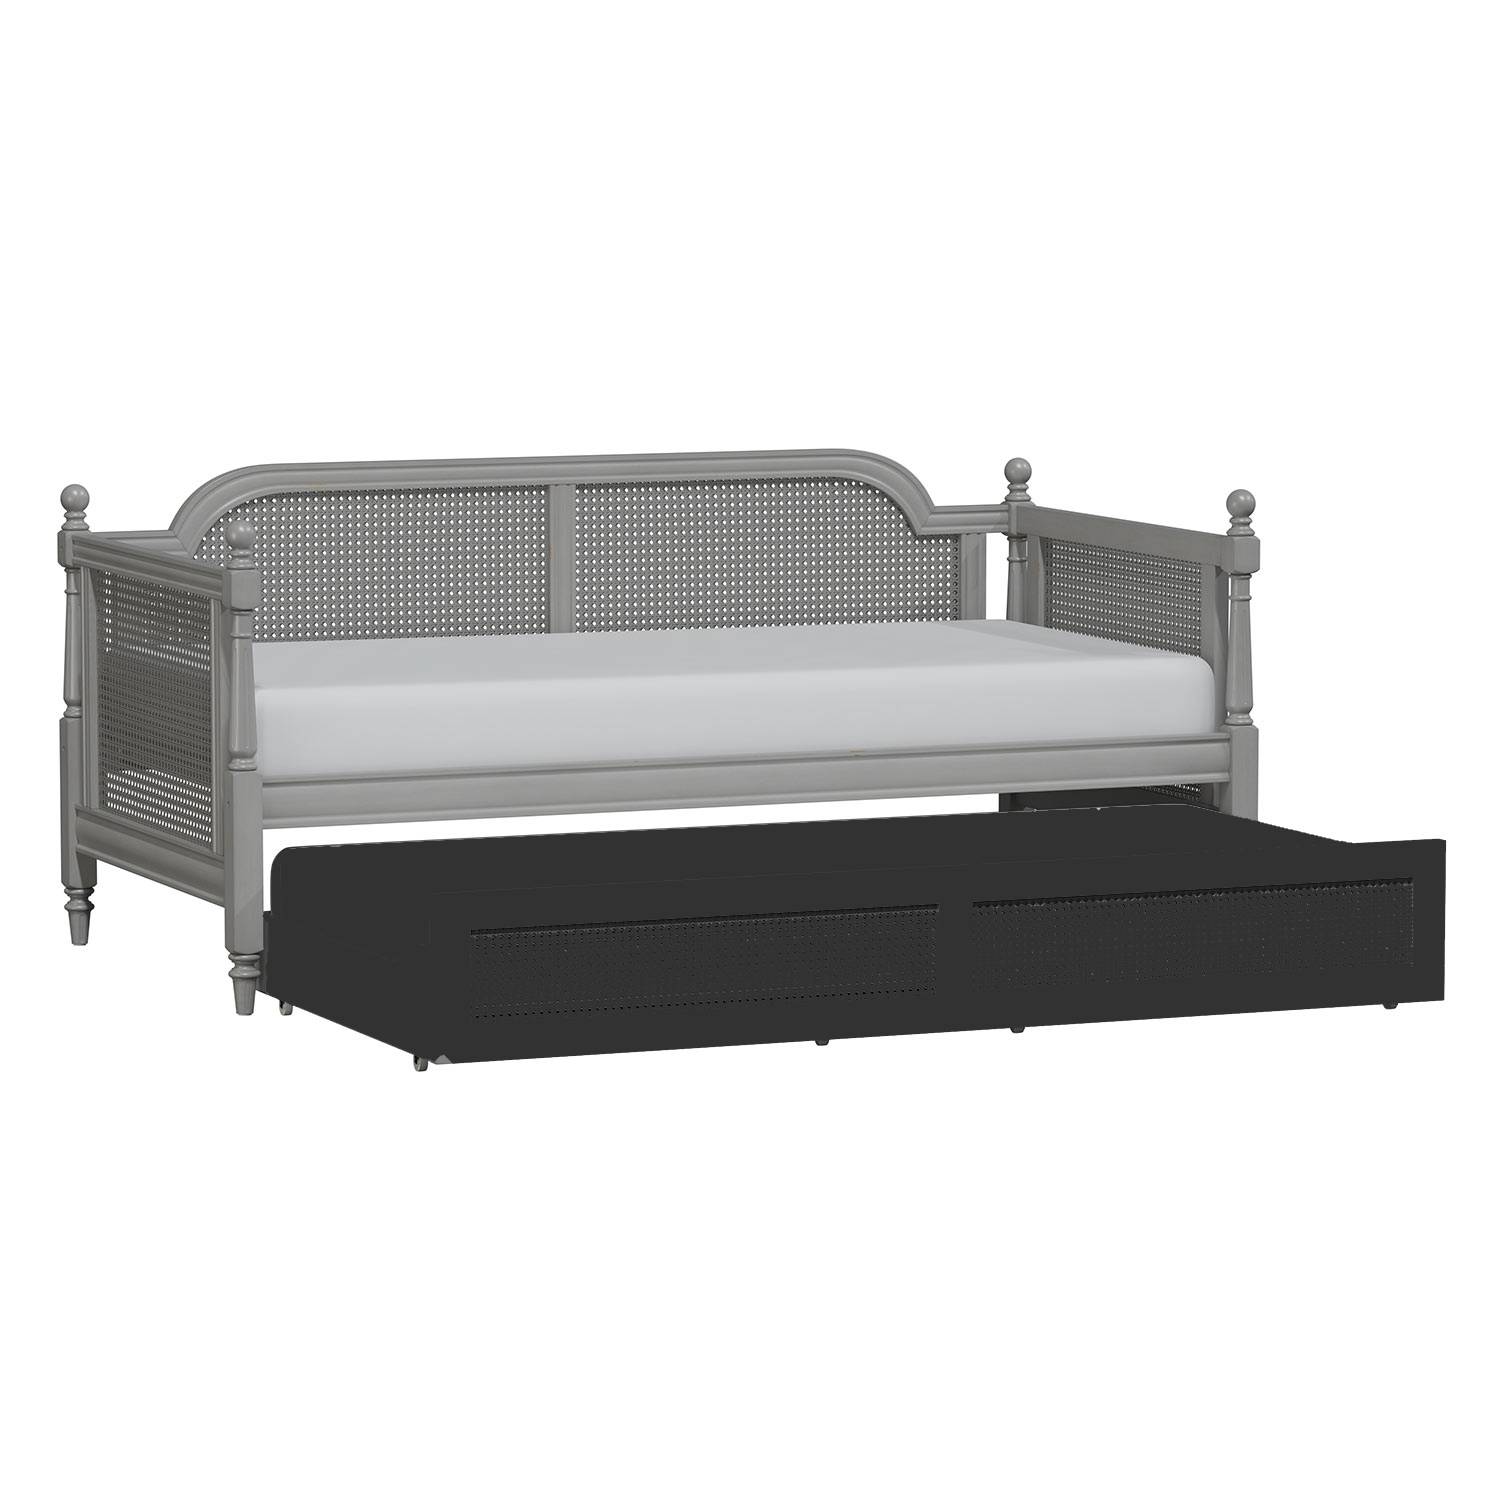 Hillsdale Melanie Wood and Cane Twin Daybed - French Gray